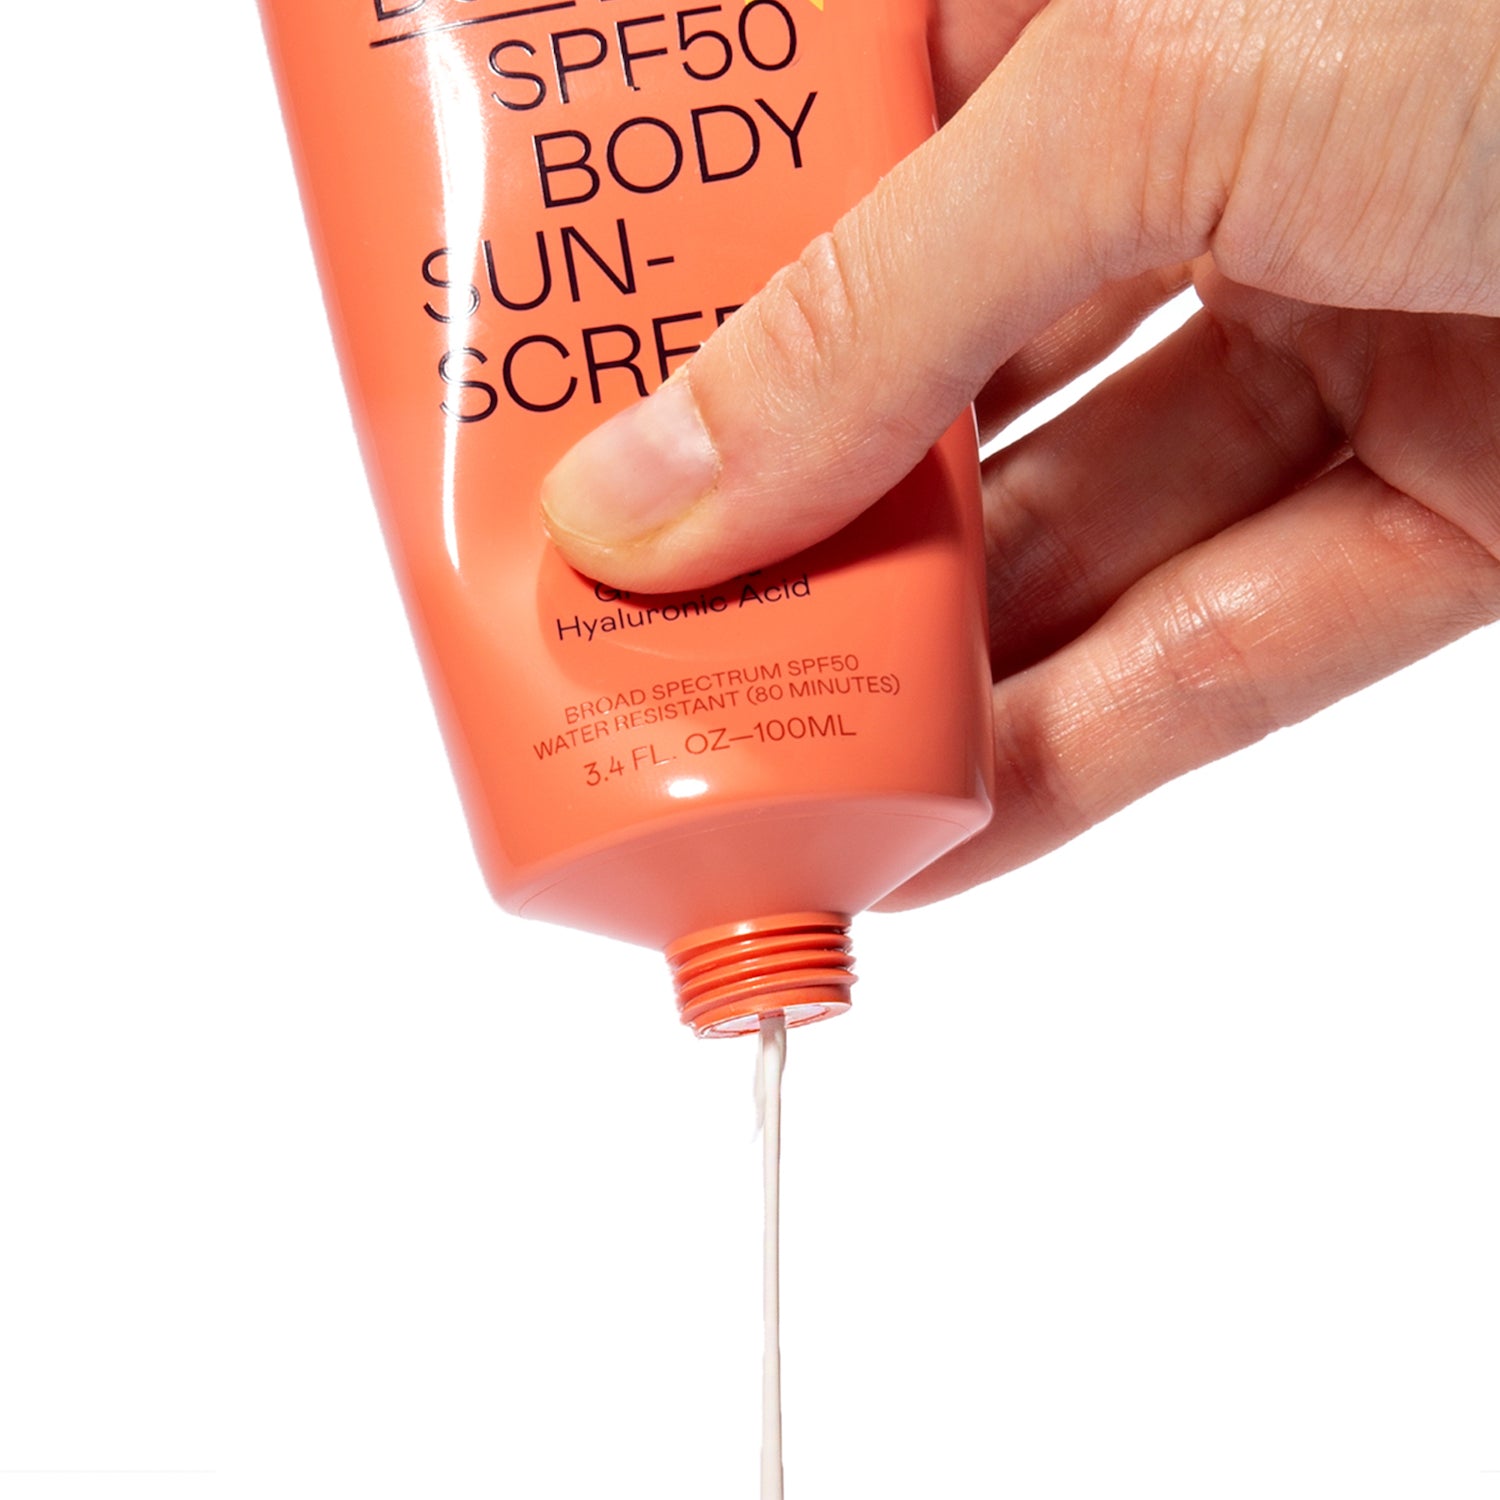 Oh My Bod! SPF 50 Sunscreen Lotion